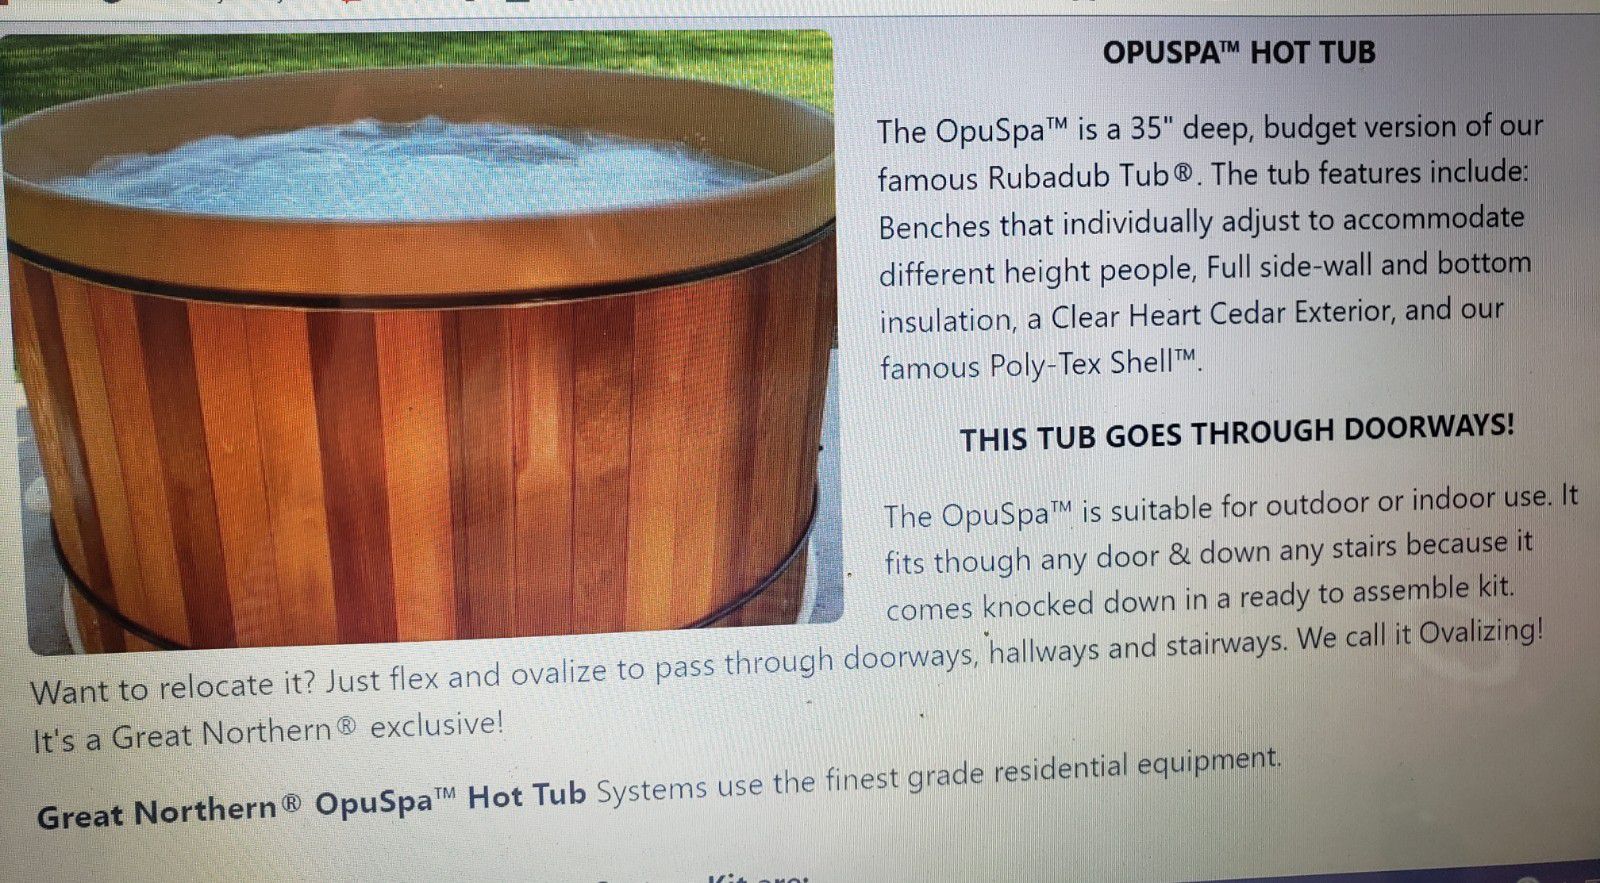 Hot tub. Great Northern hottub. Western red cedar. 5ft w. 3ft dp. 4 jets. bench, pump, filter, heater, jet, plumbing, cover. Never taken out of box.